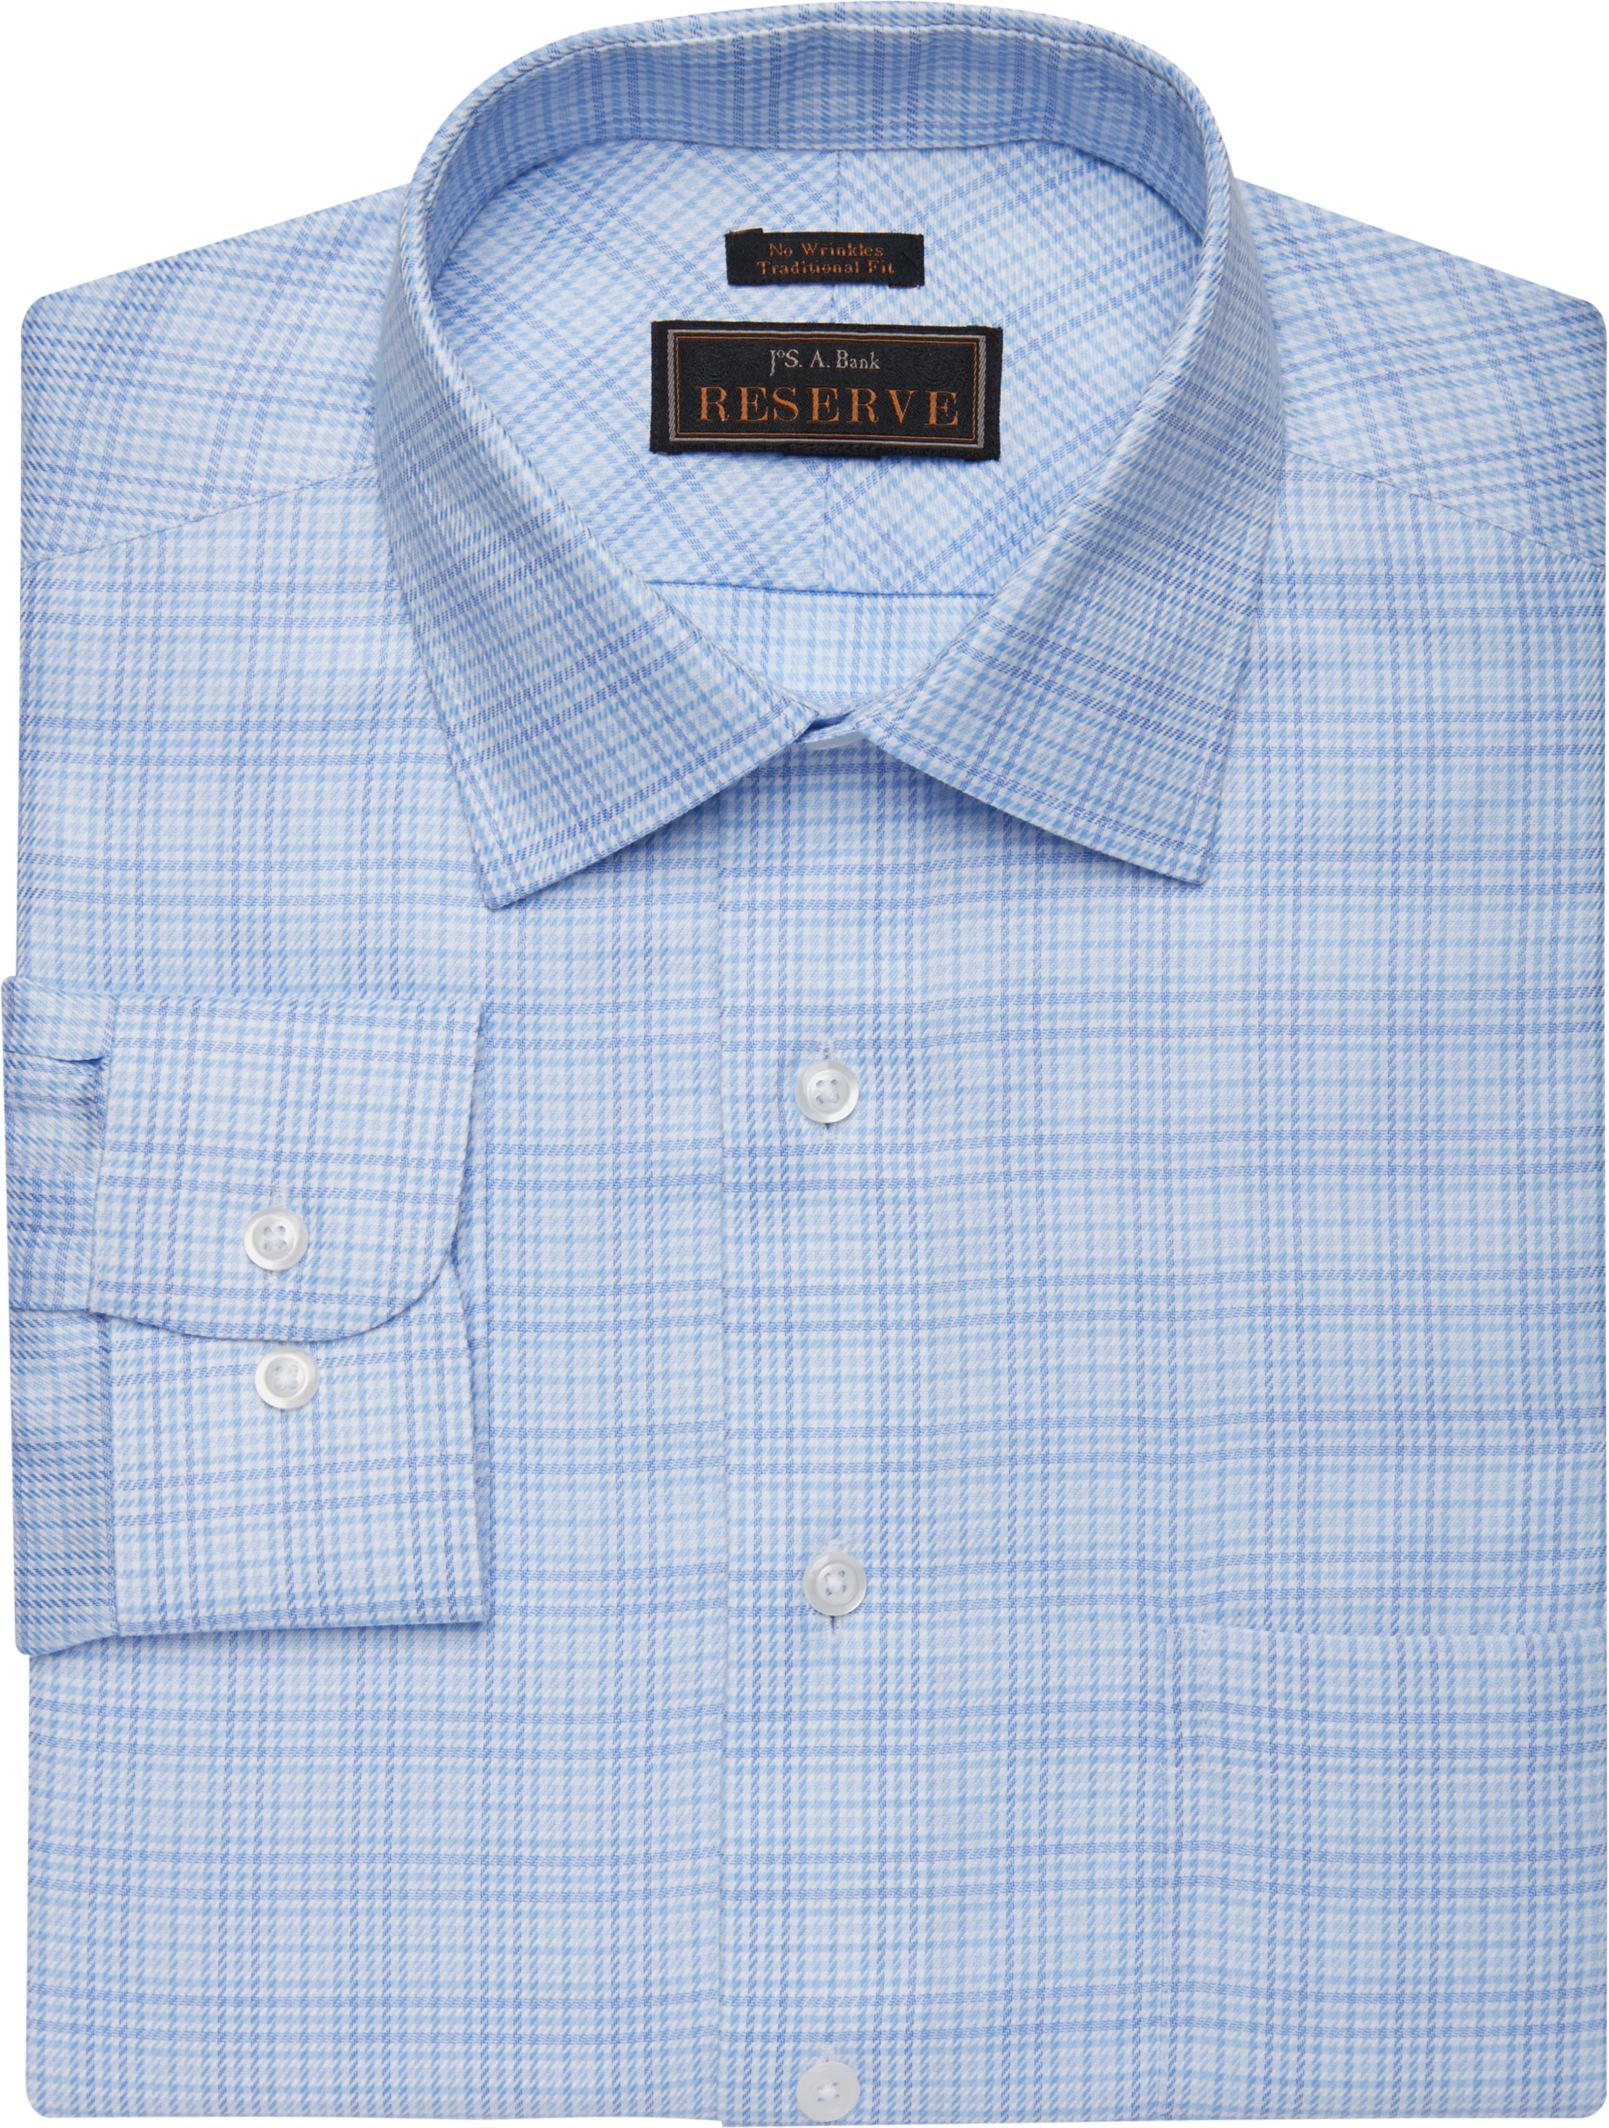 Reserve Collection Traditional Fit Spread Collar Plaid Dress Shirt ...